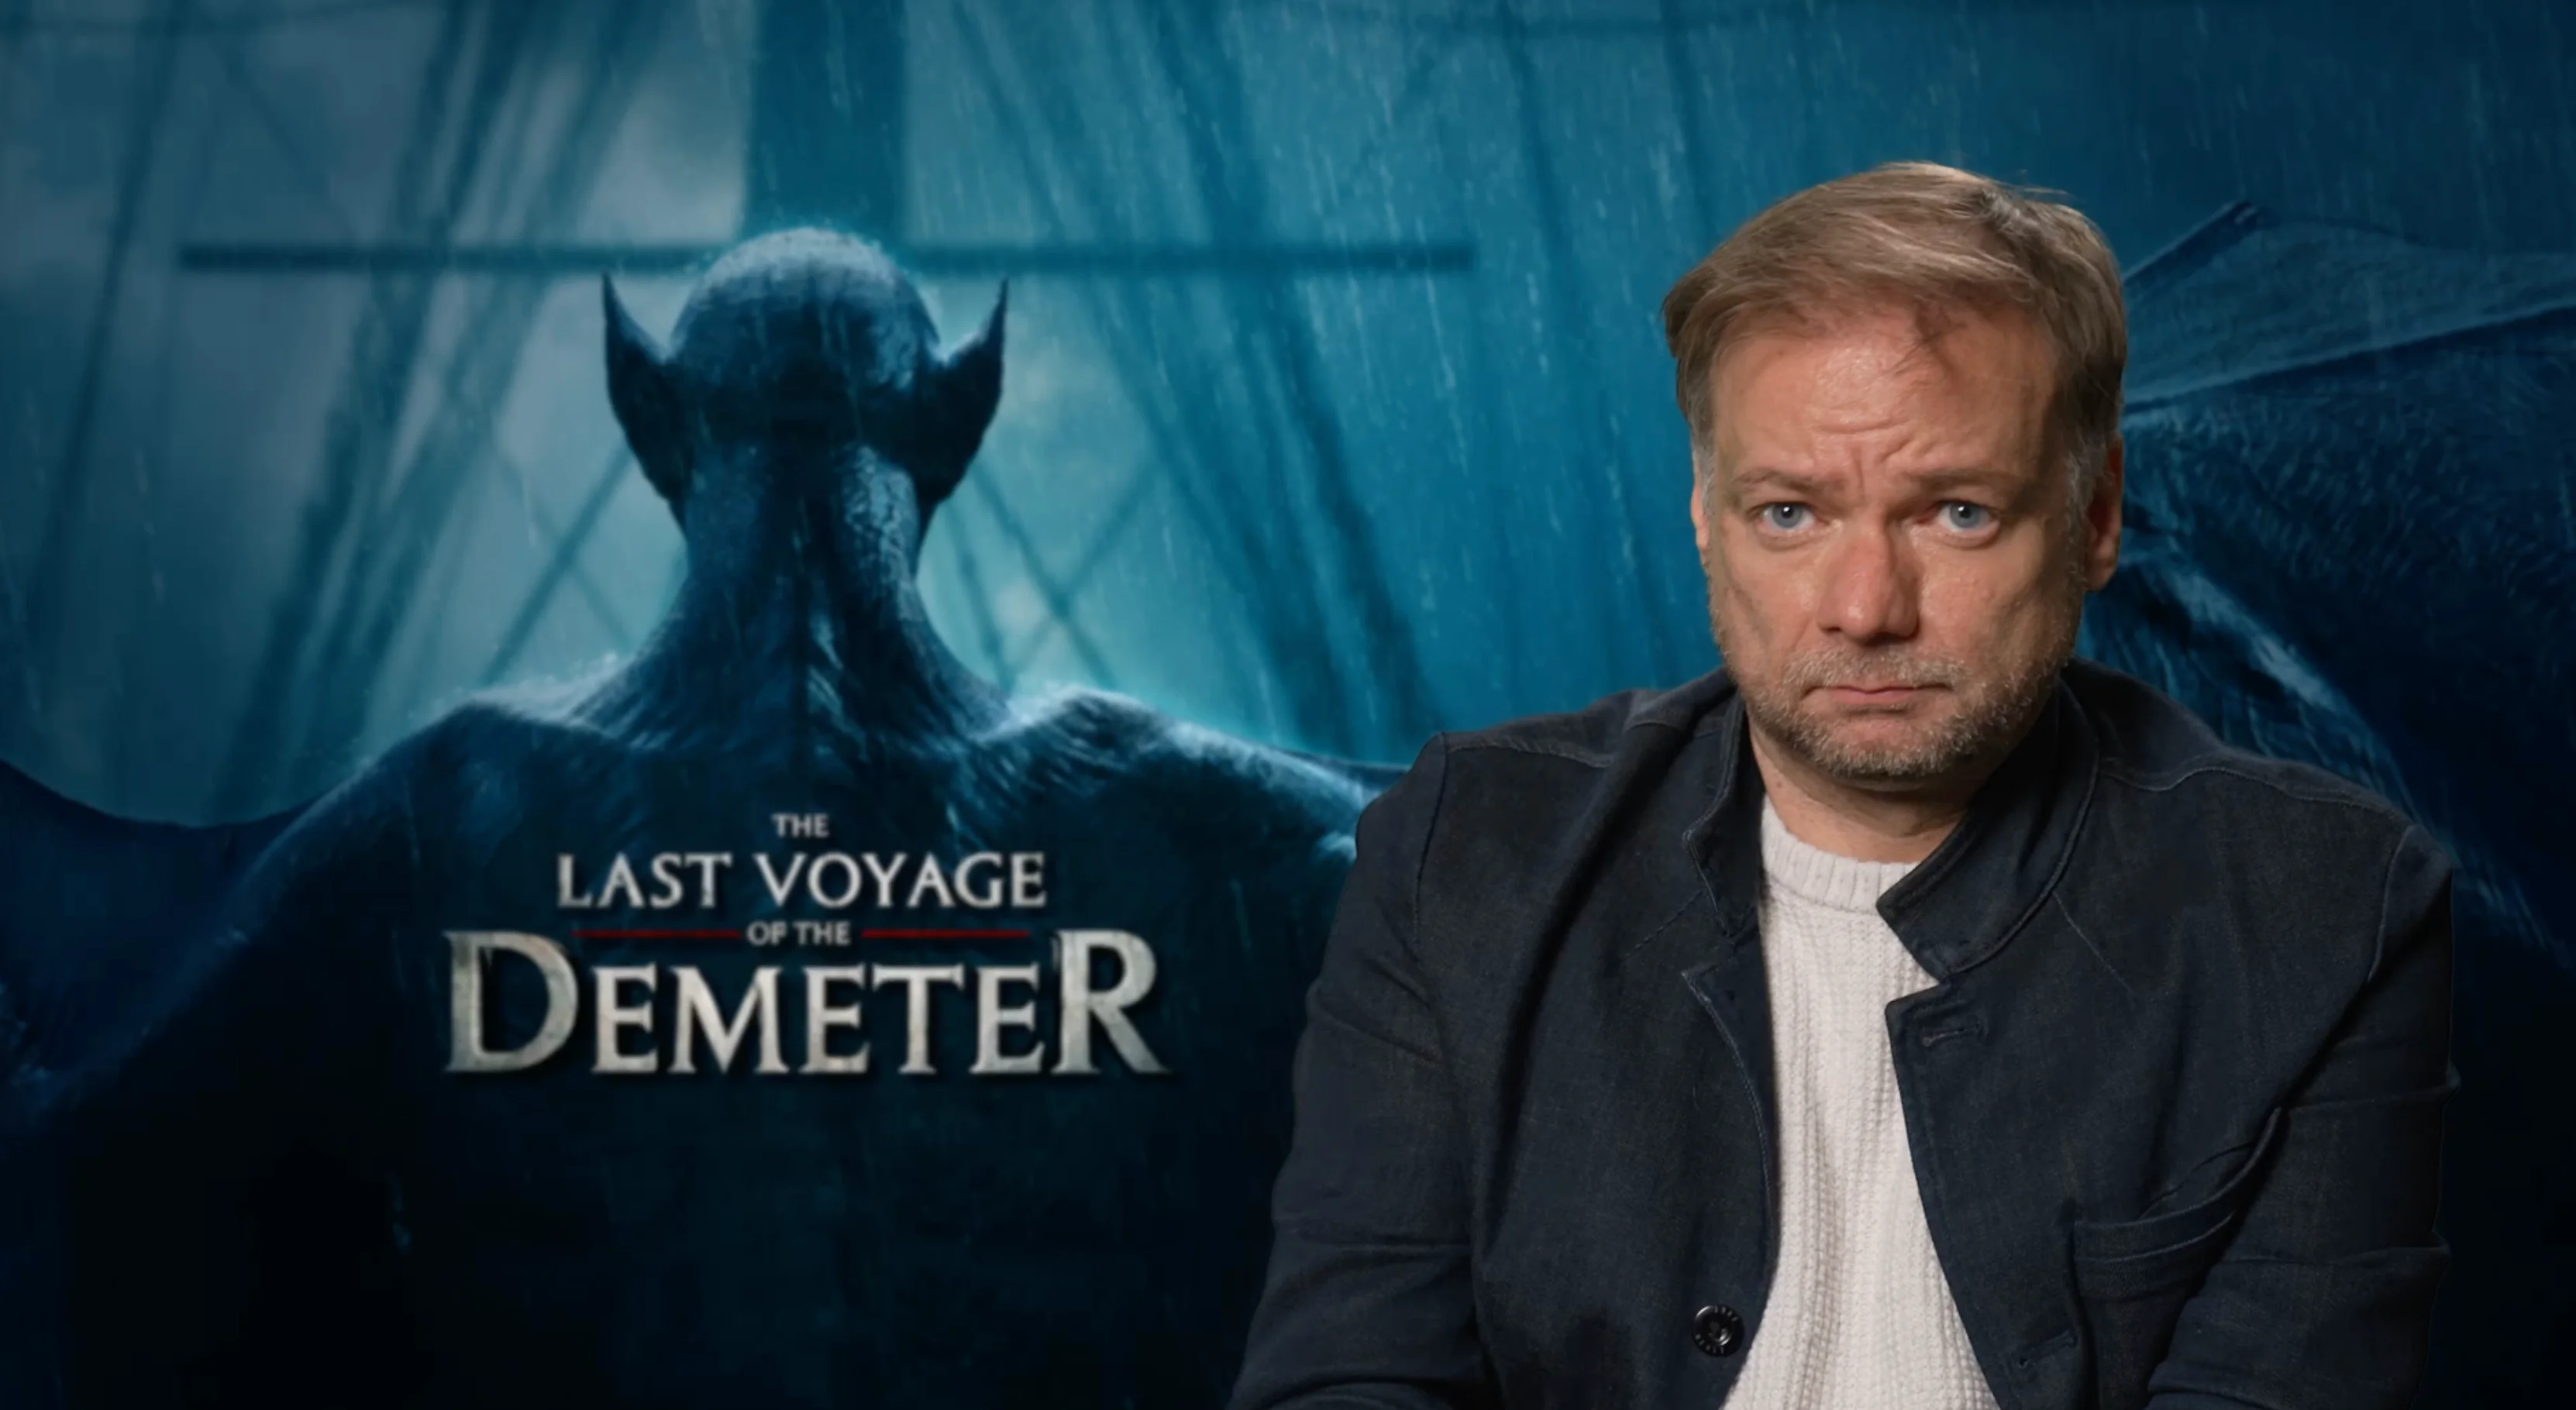 EUR: 'The Last Voyage of the Demeter' Andre Overdaul on Vimeo